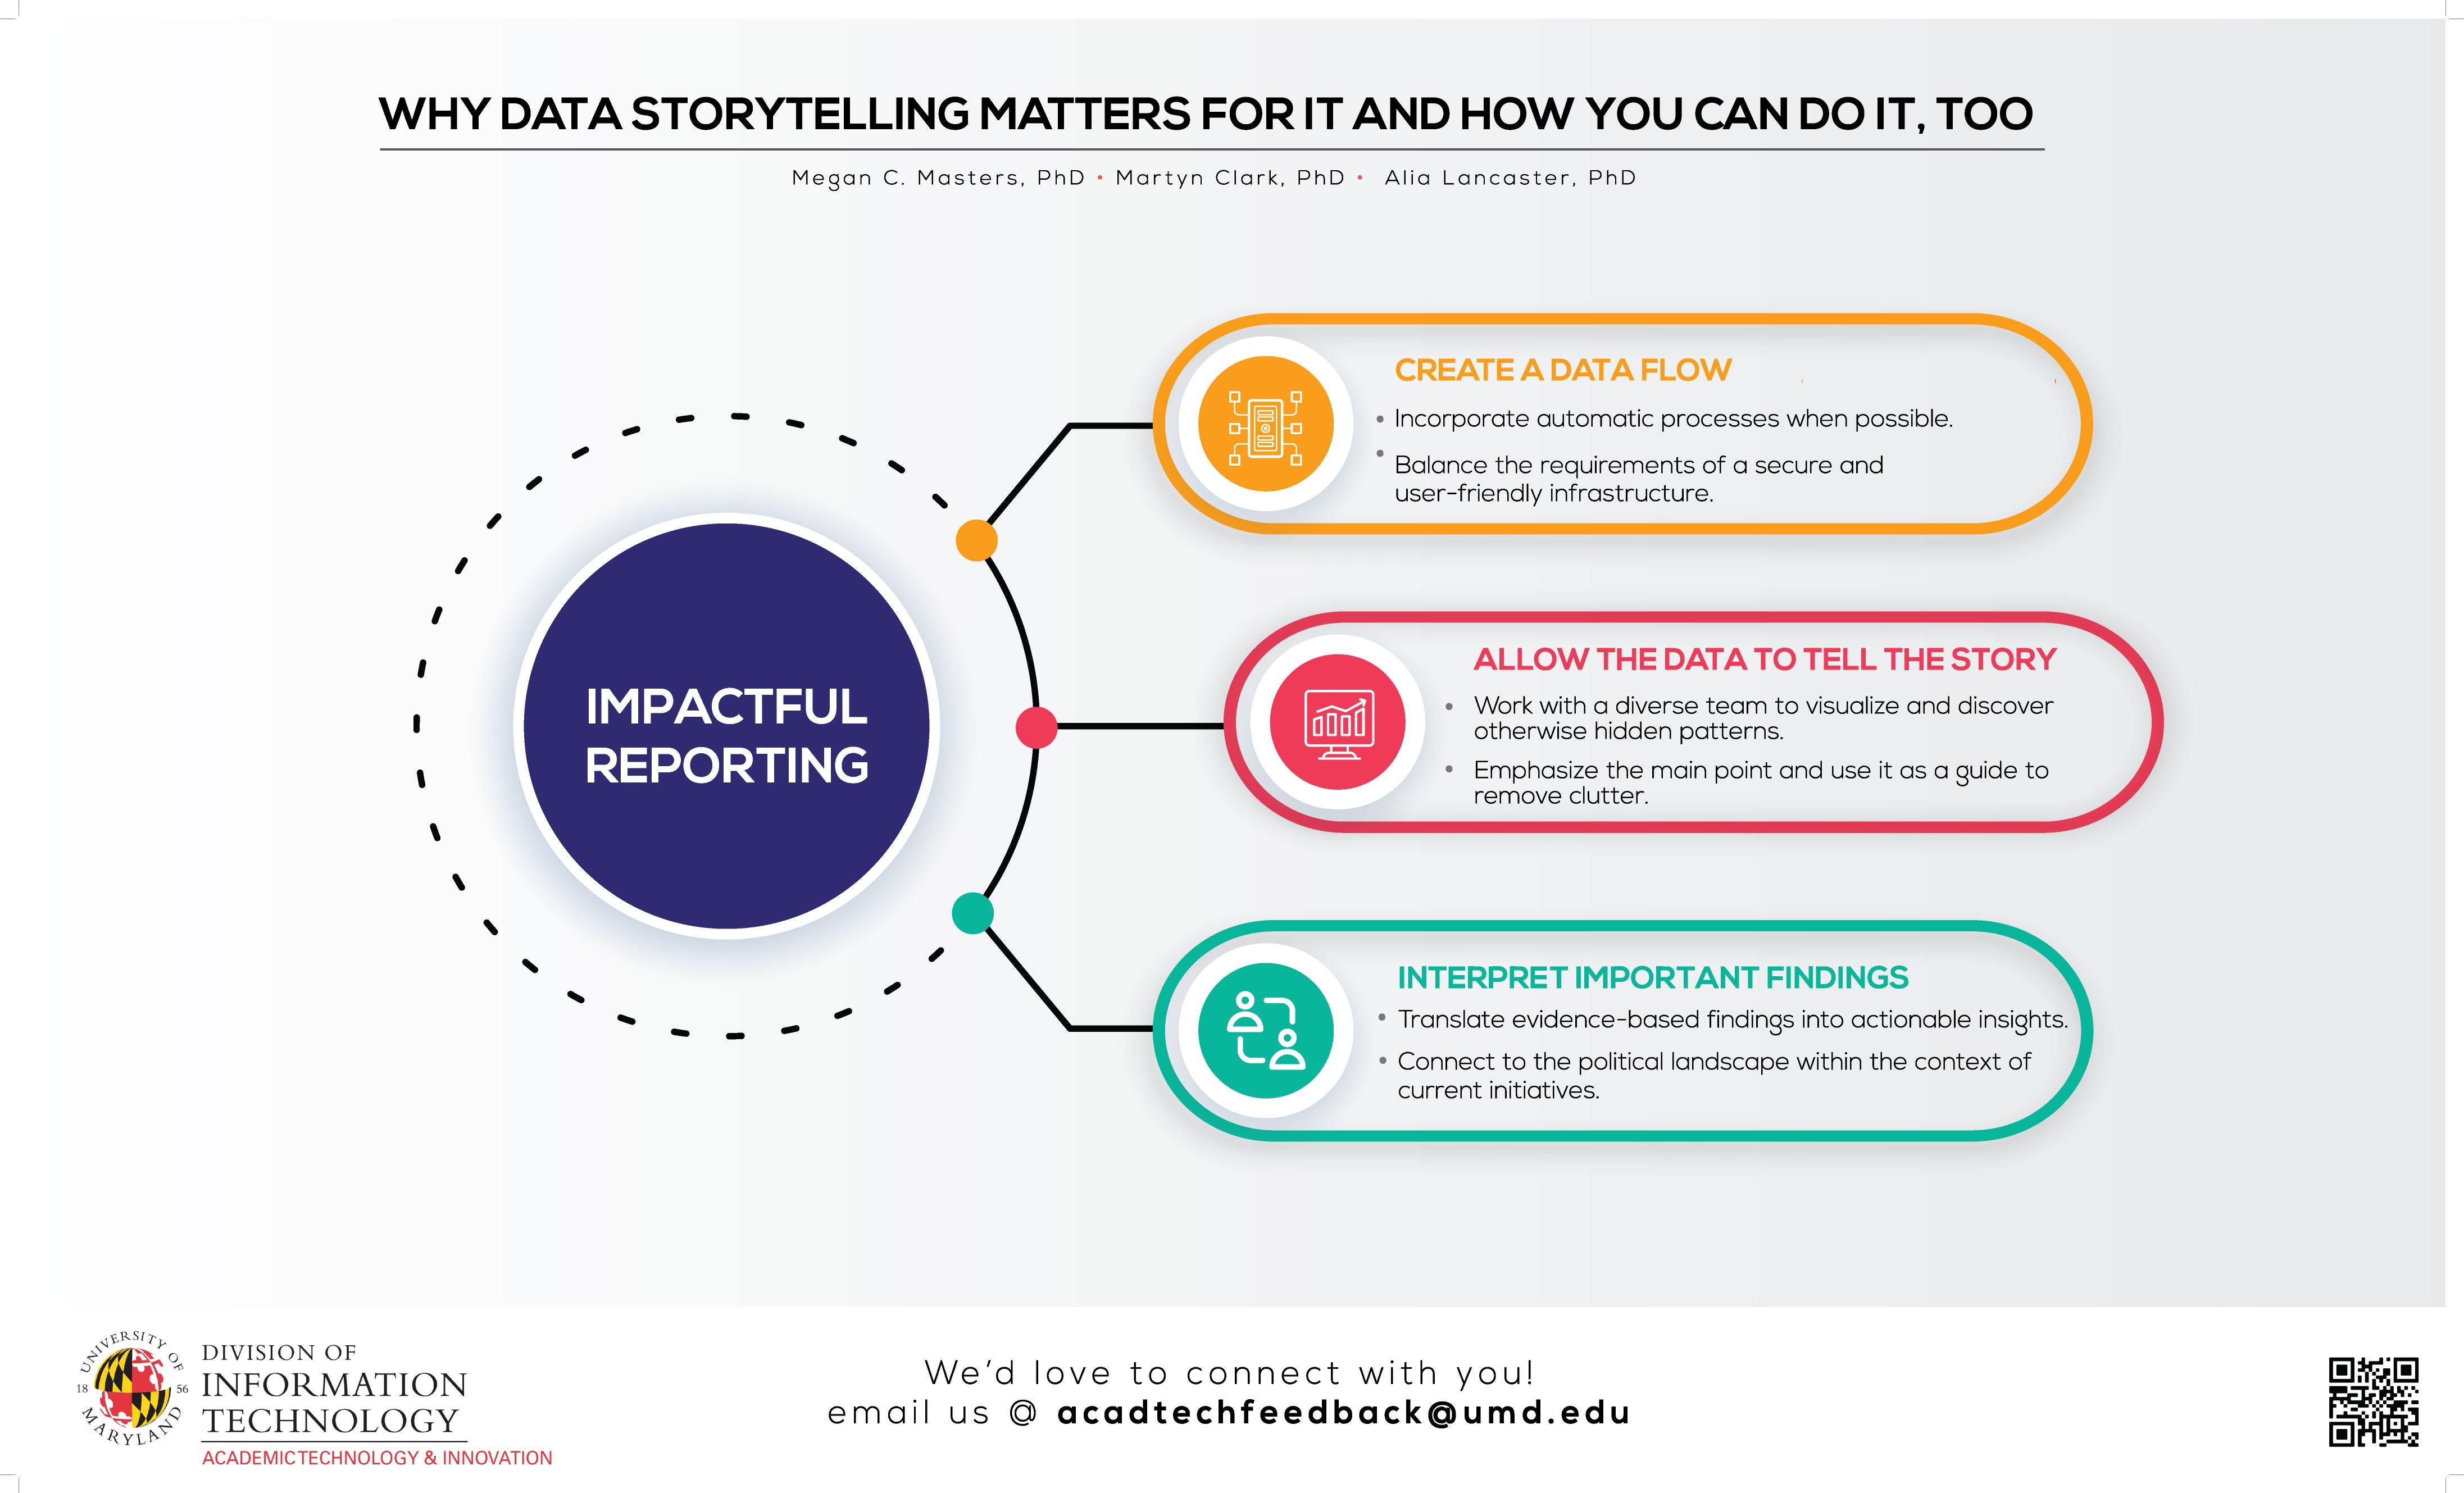 Conference poster titled why data storytelling matters for IT and how you can do it, too